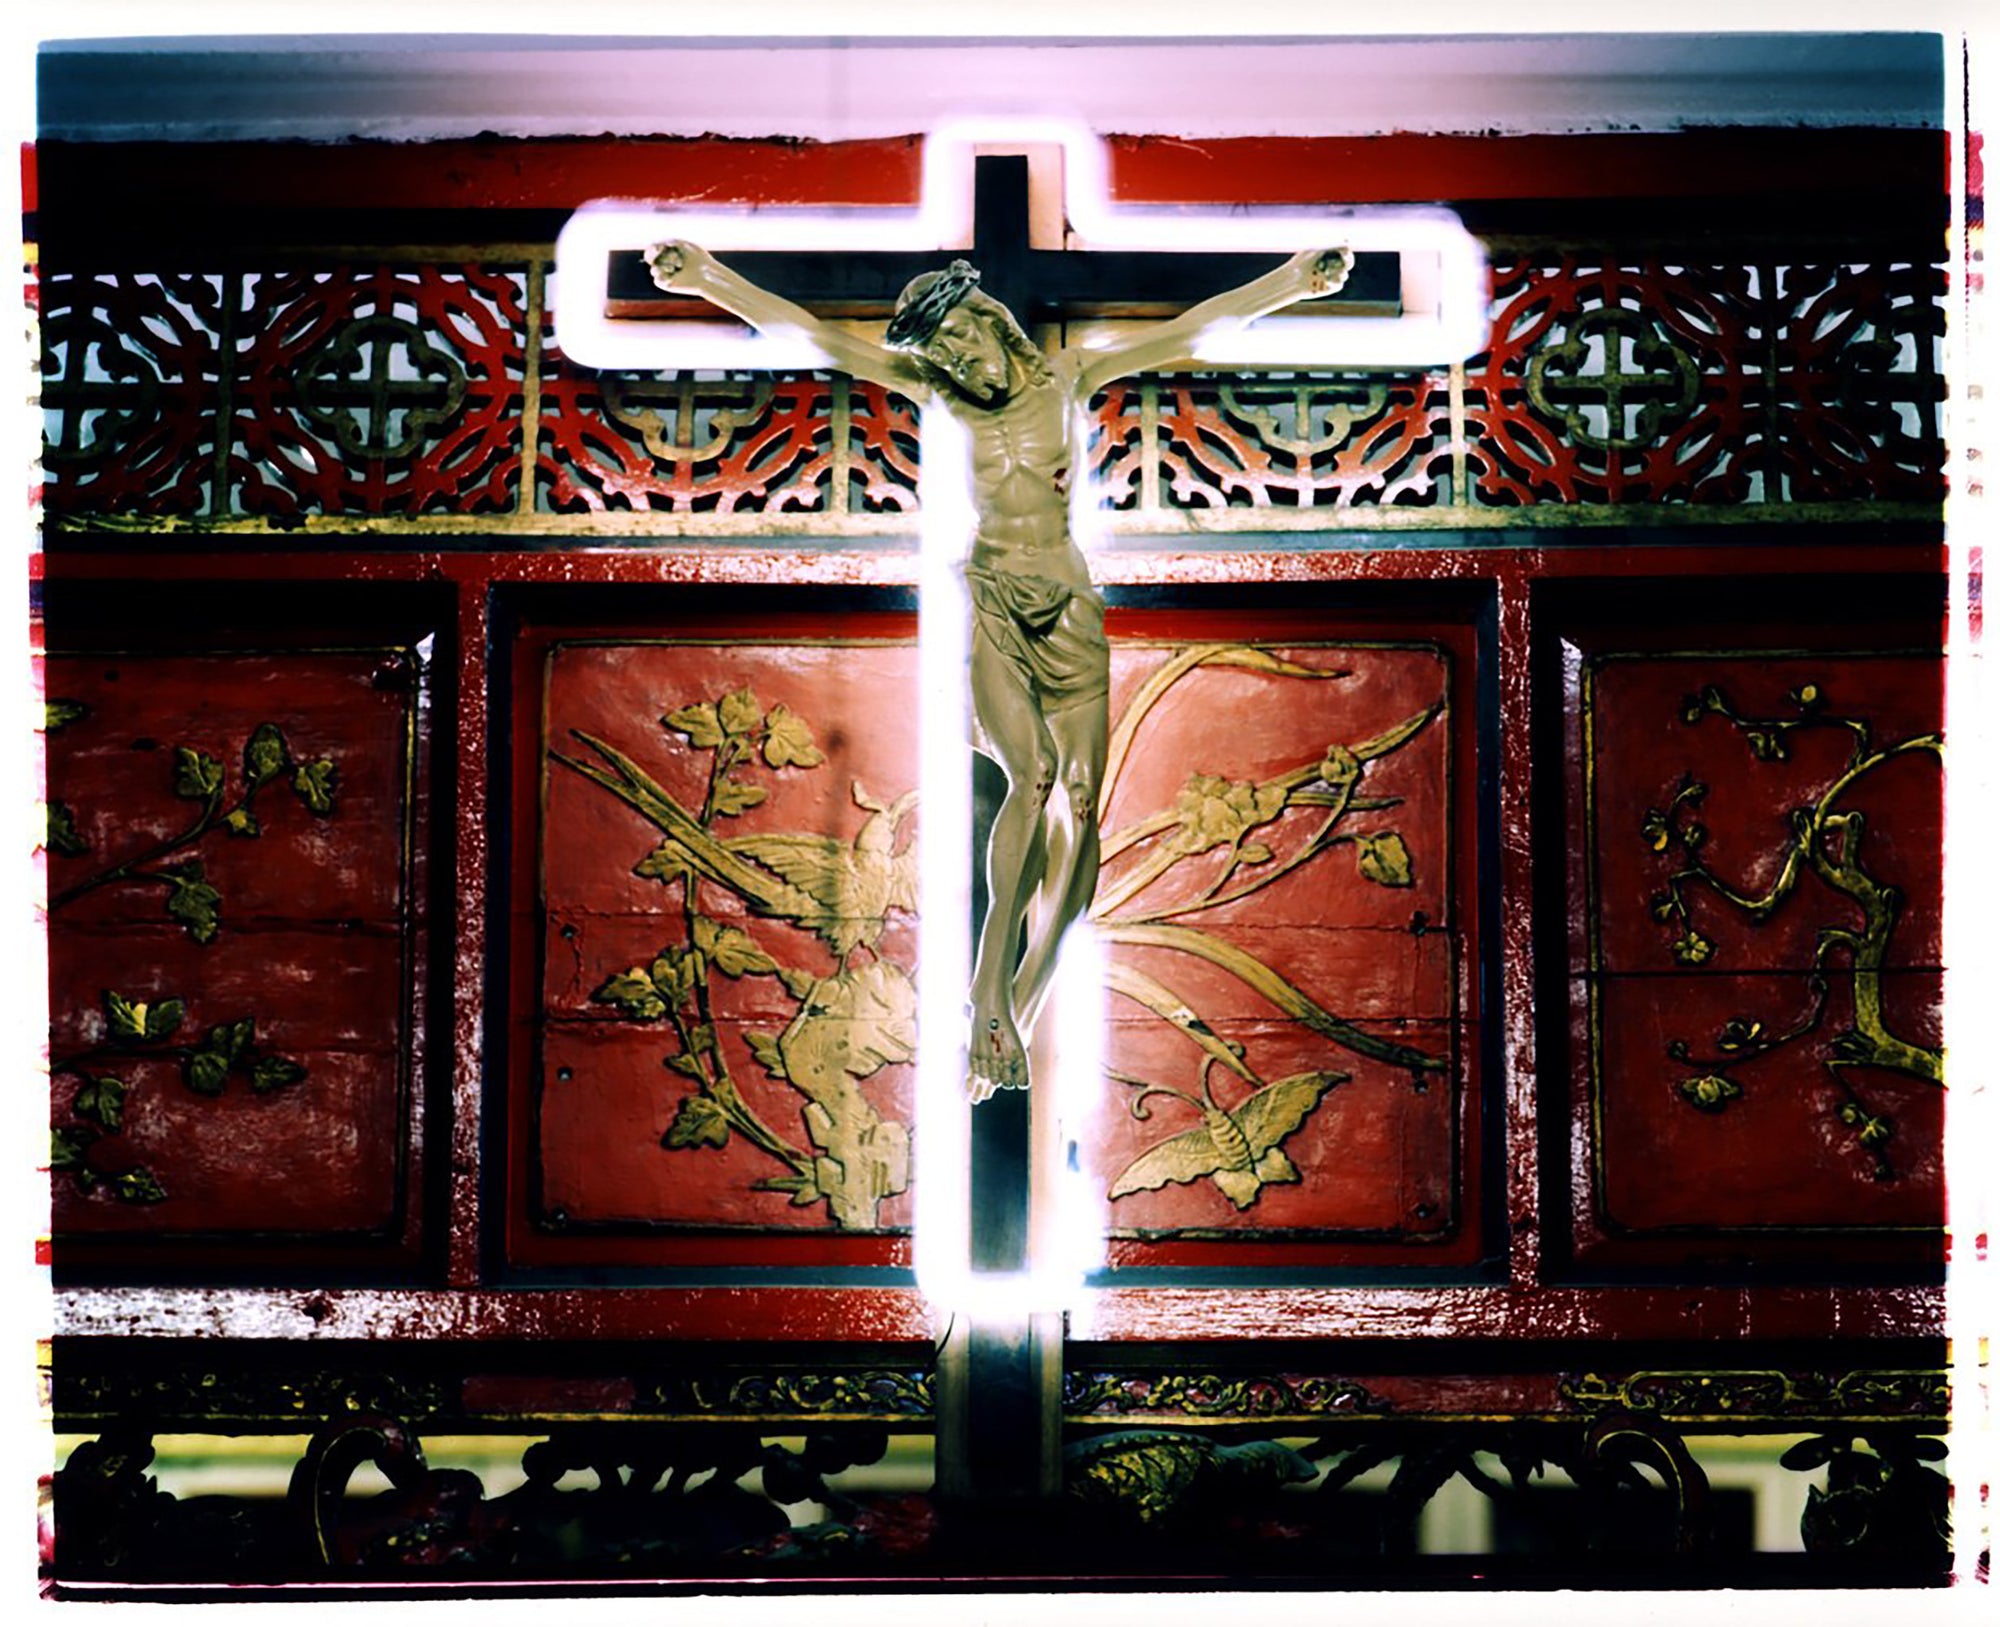 Photograph by Richard Heeps. A marble effect Jesus Christ statue hangs on a wooden cross which is surrounded with a white neon light. This sits against a wooden screen with gold carved patterns of flowers and butterlies.